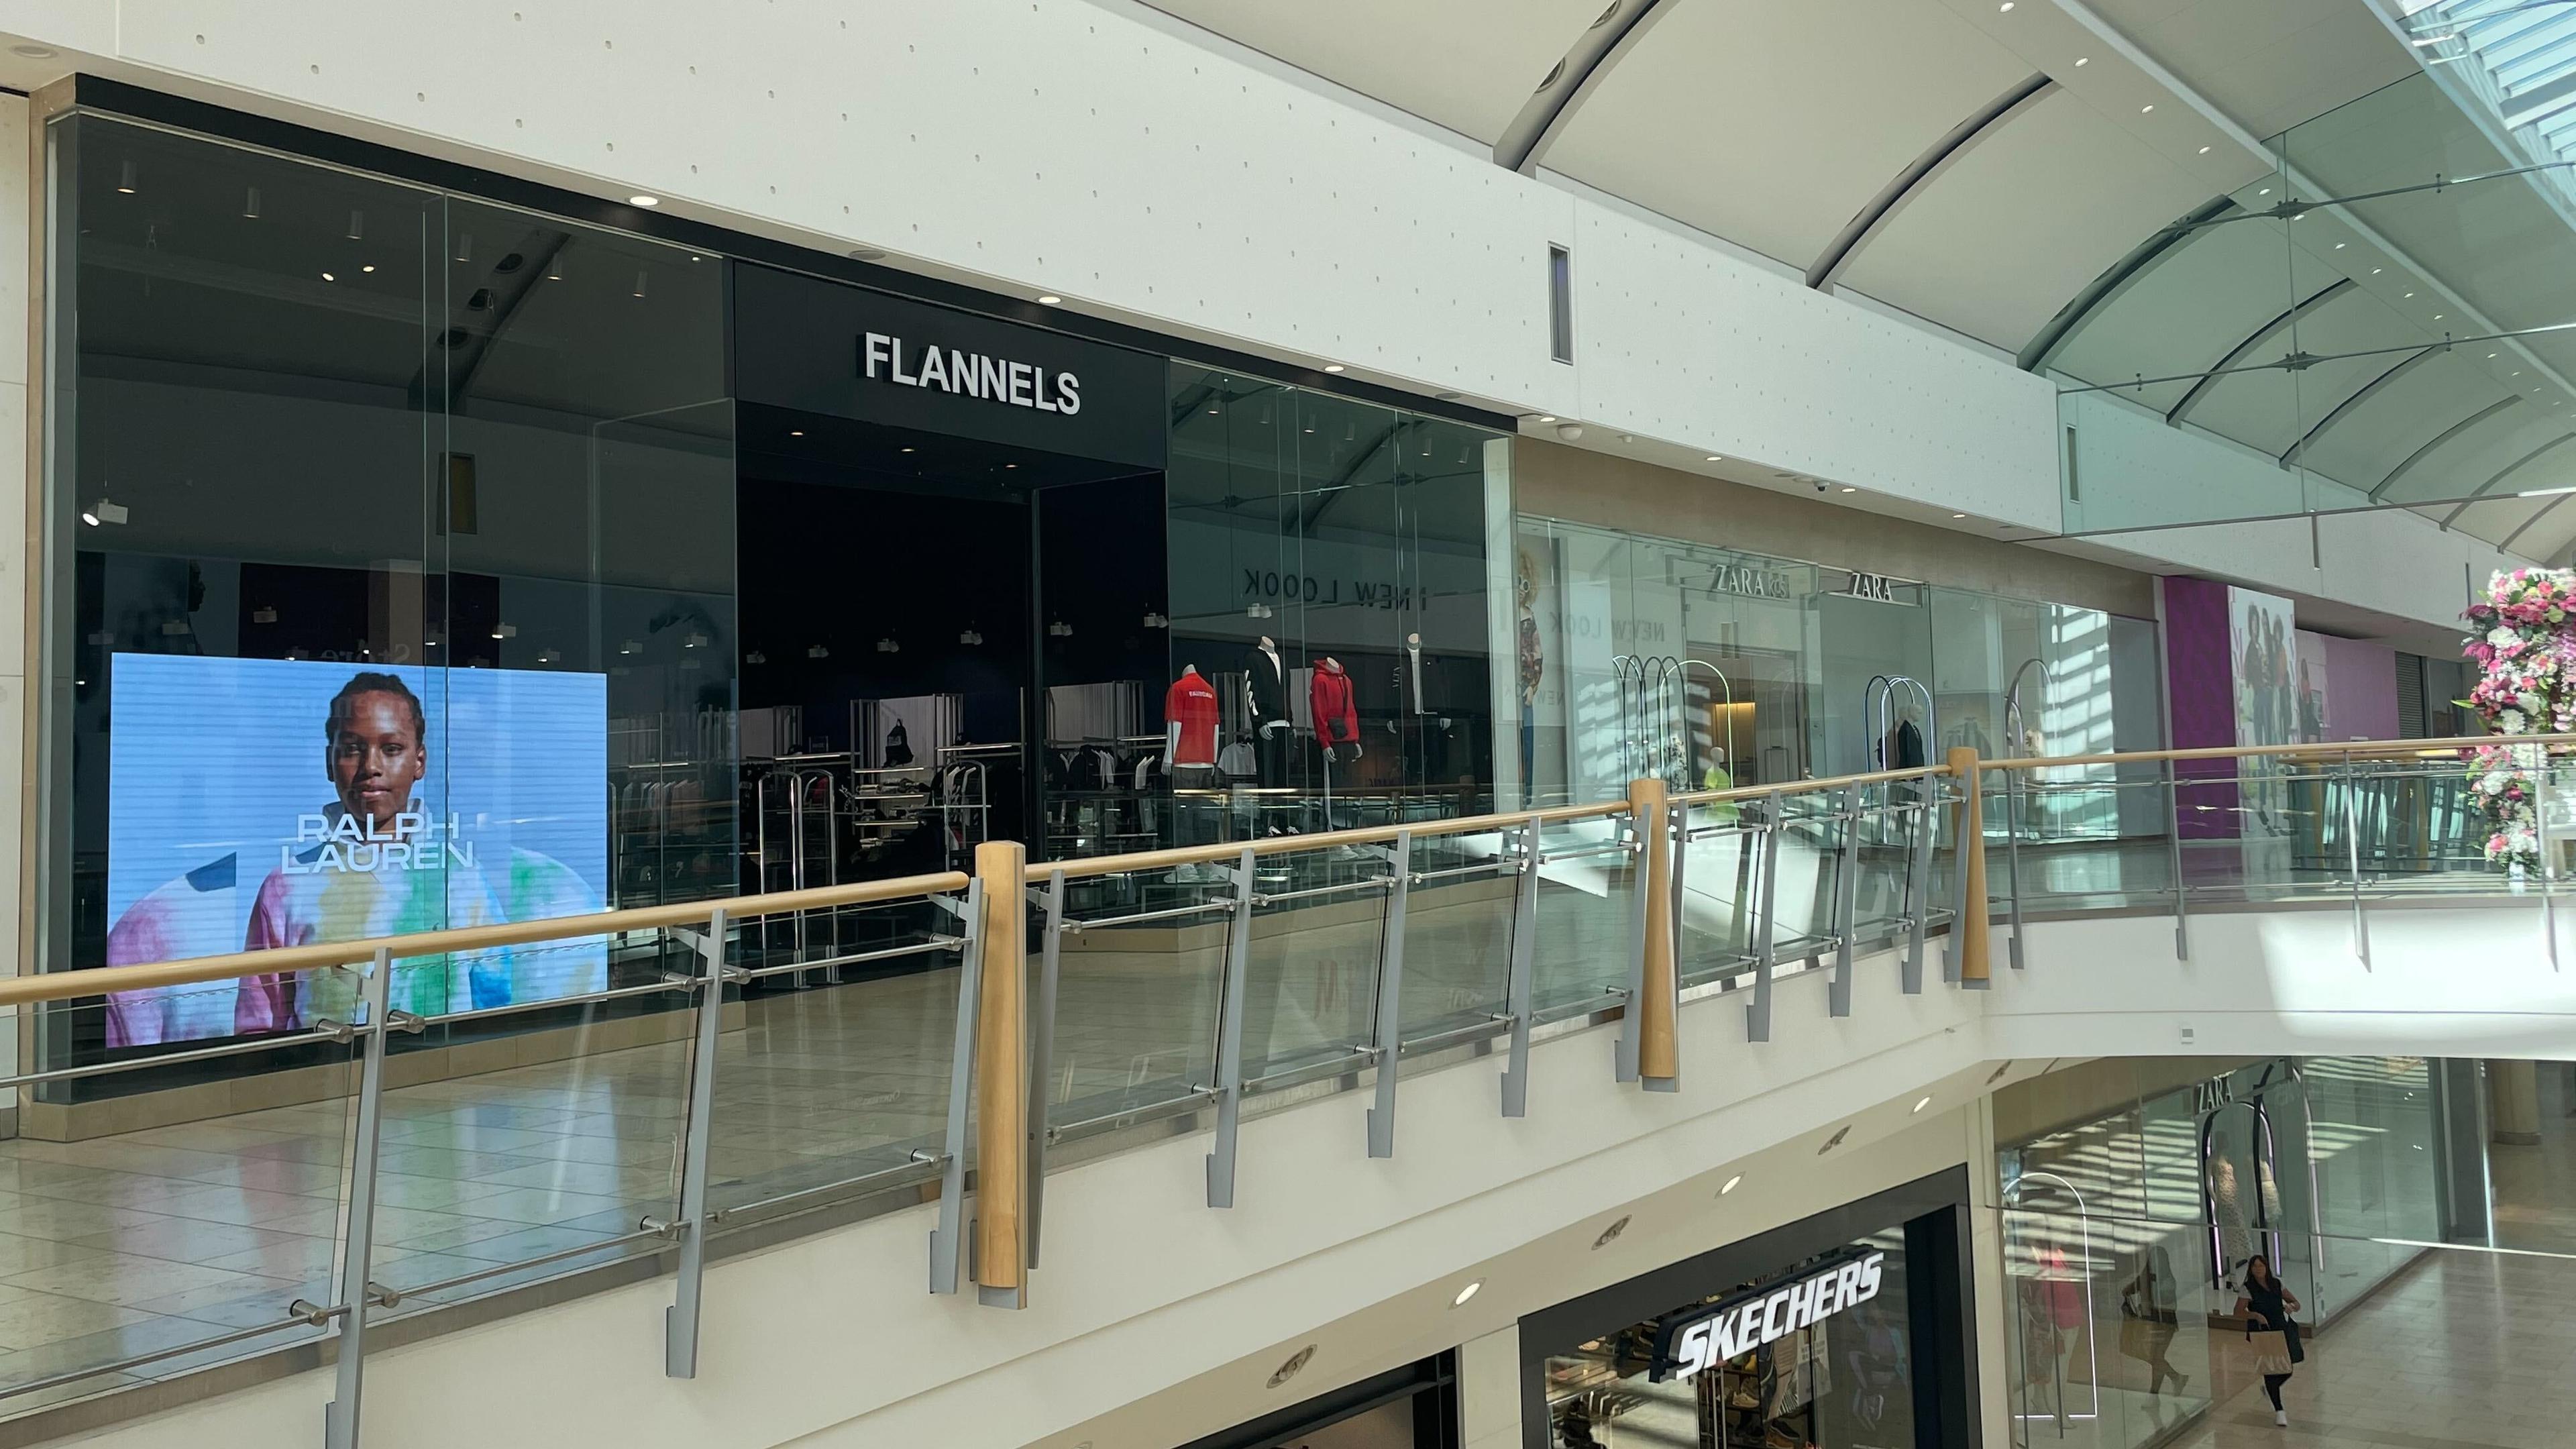 exterior of the flannels shop in the Metrocentre, Gateshead